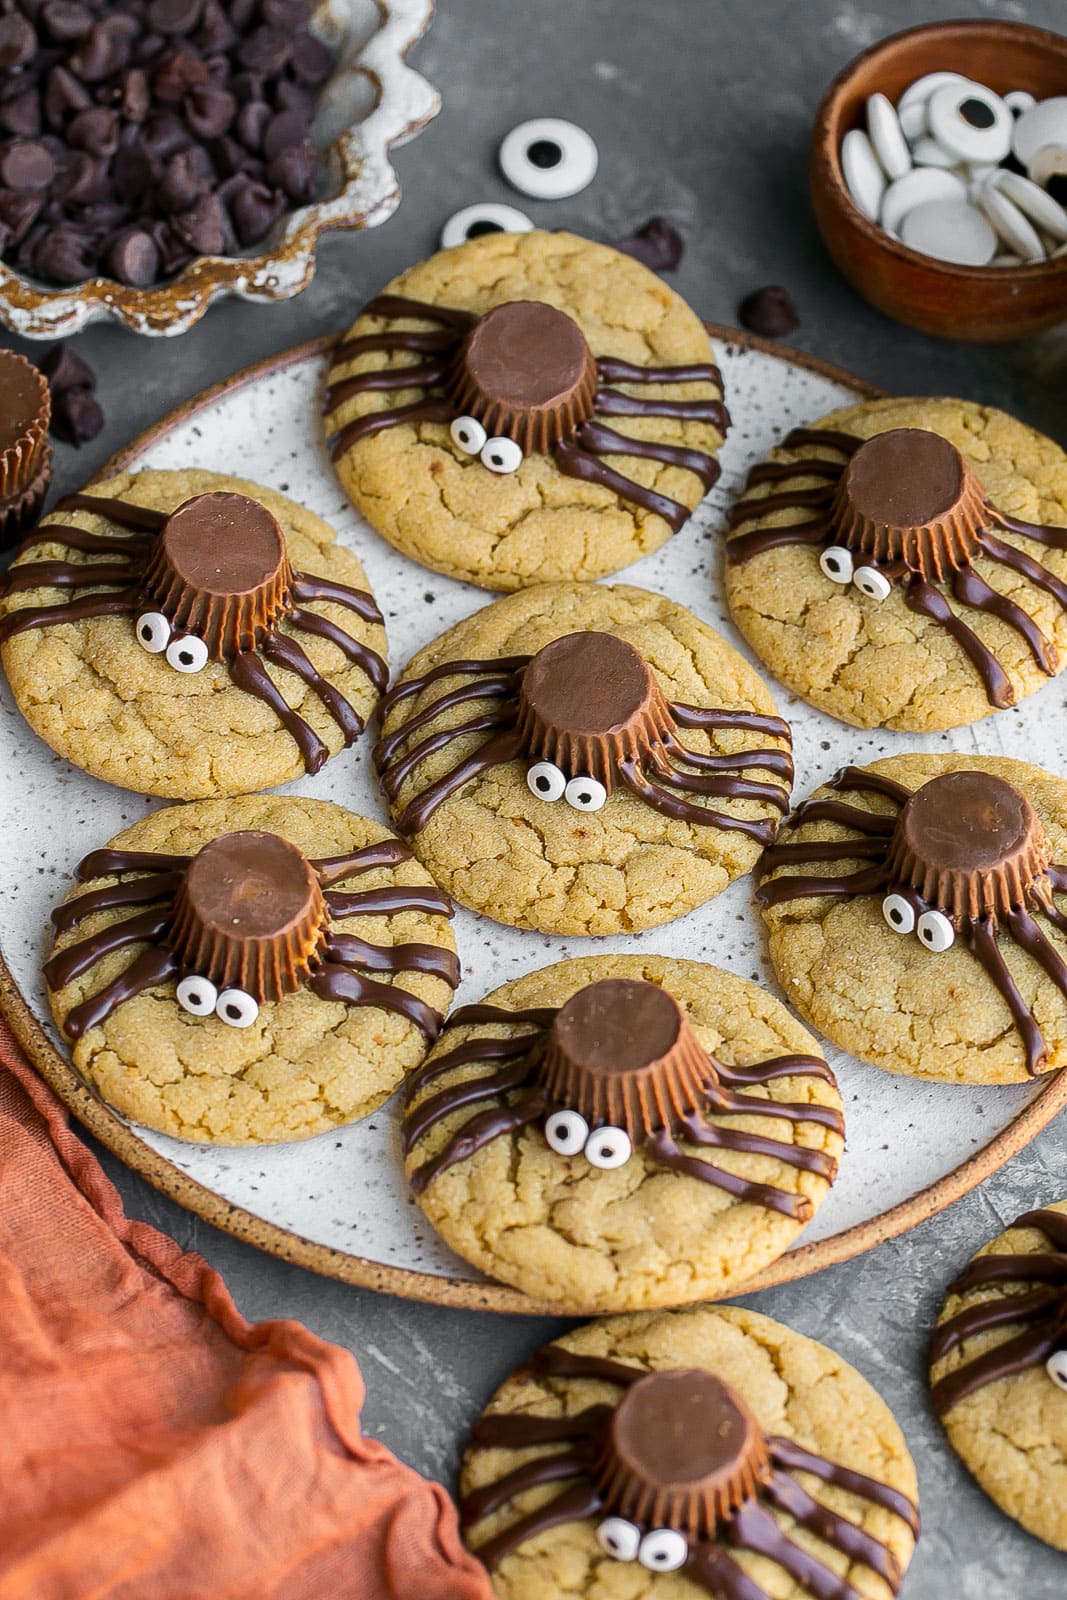 Spider cookies on a plate.